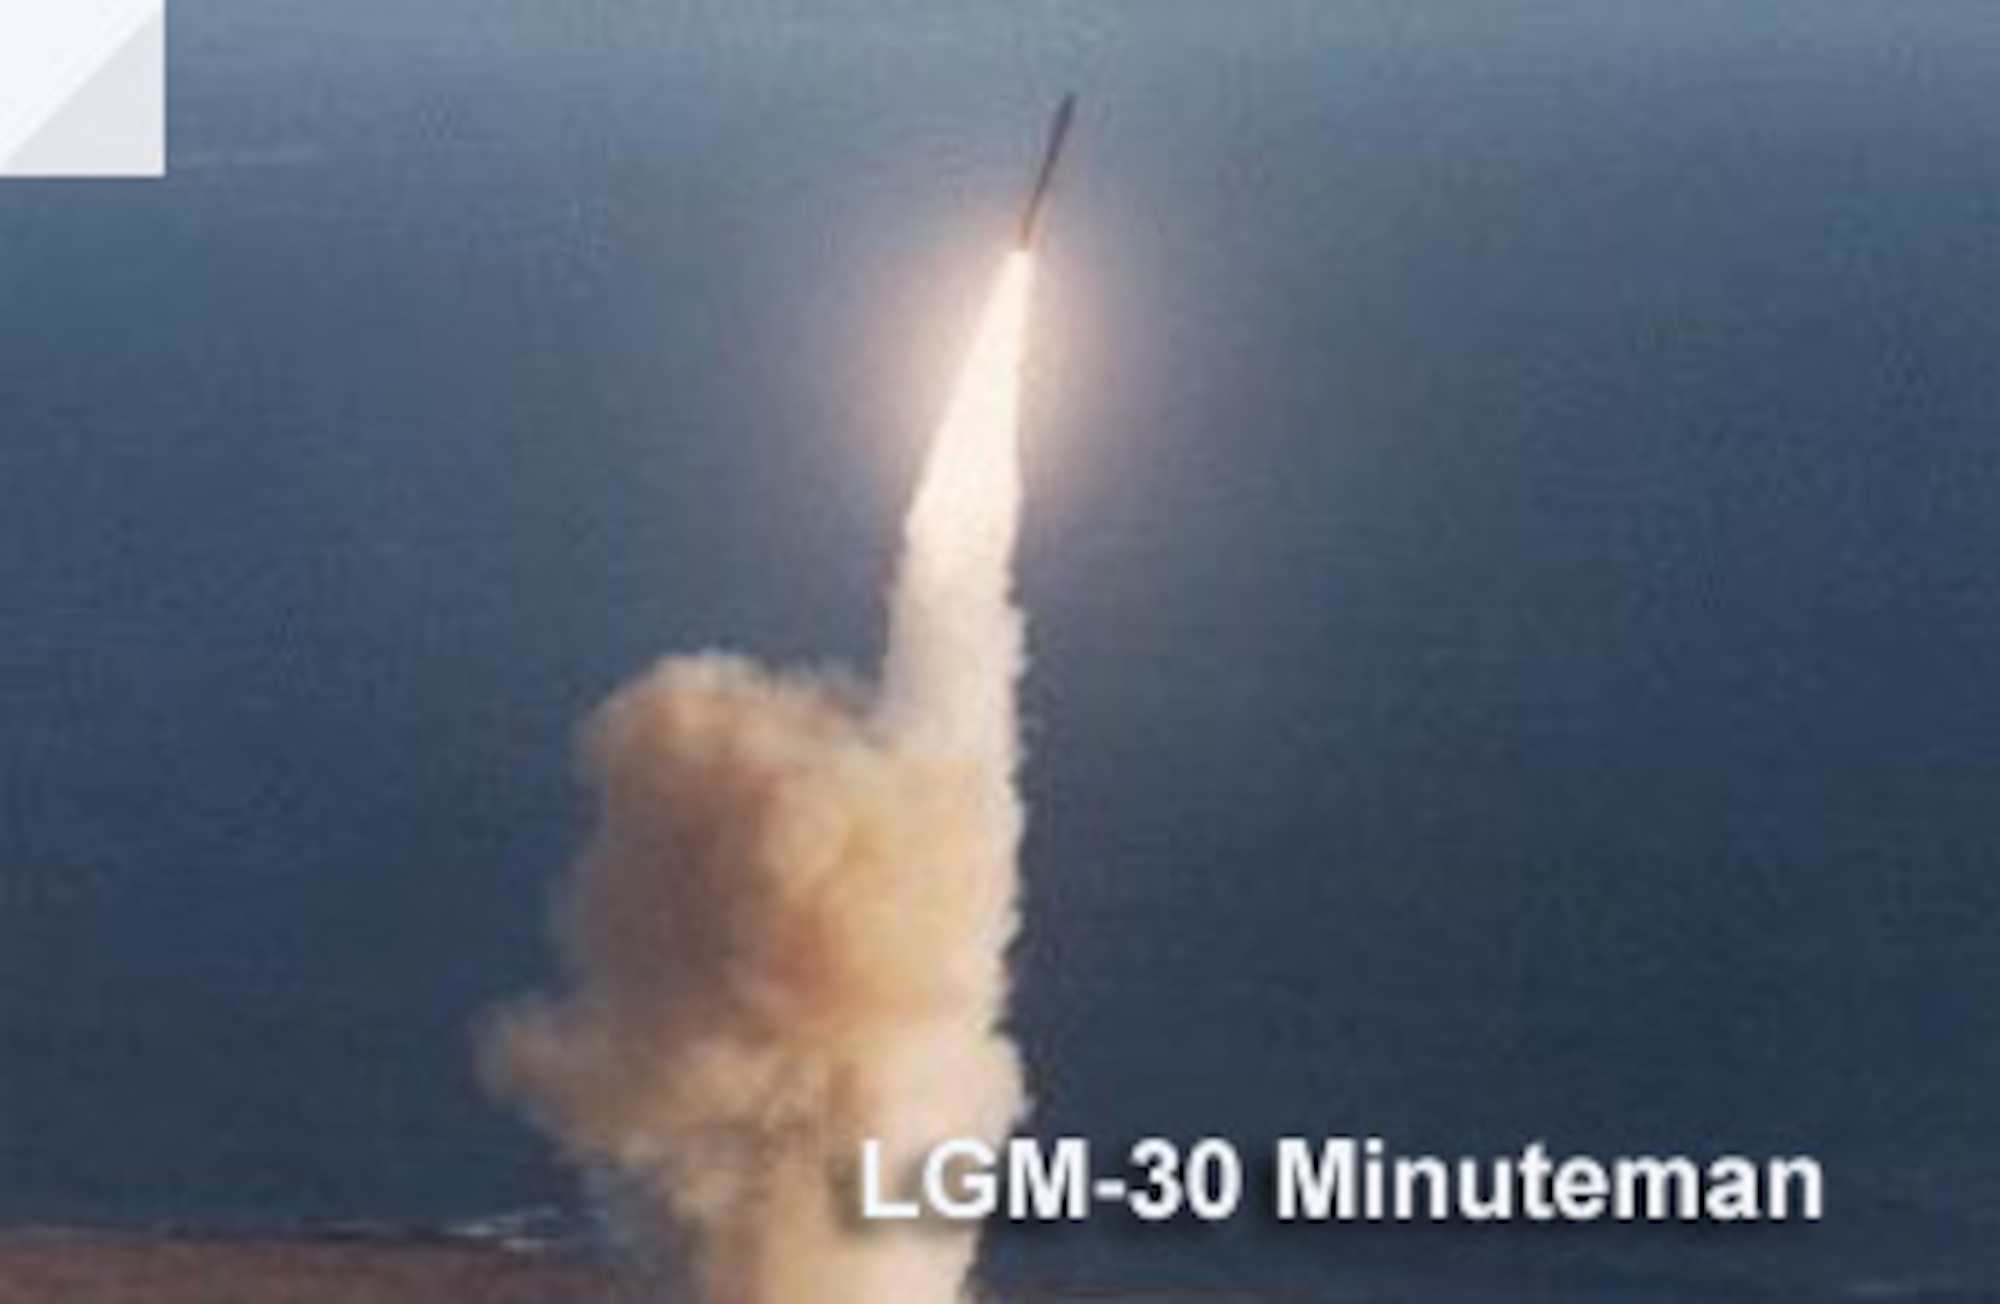 The LGM-30G Minuteman intercontinental ballistic missile, or ICBM, is an element of the nation's strategic deterrent forces under the control of the Air Force Global Strike Command. 